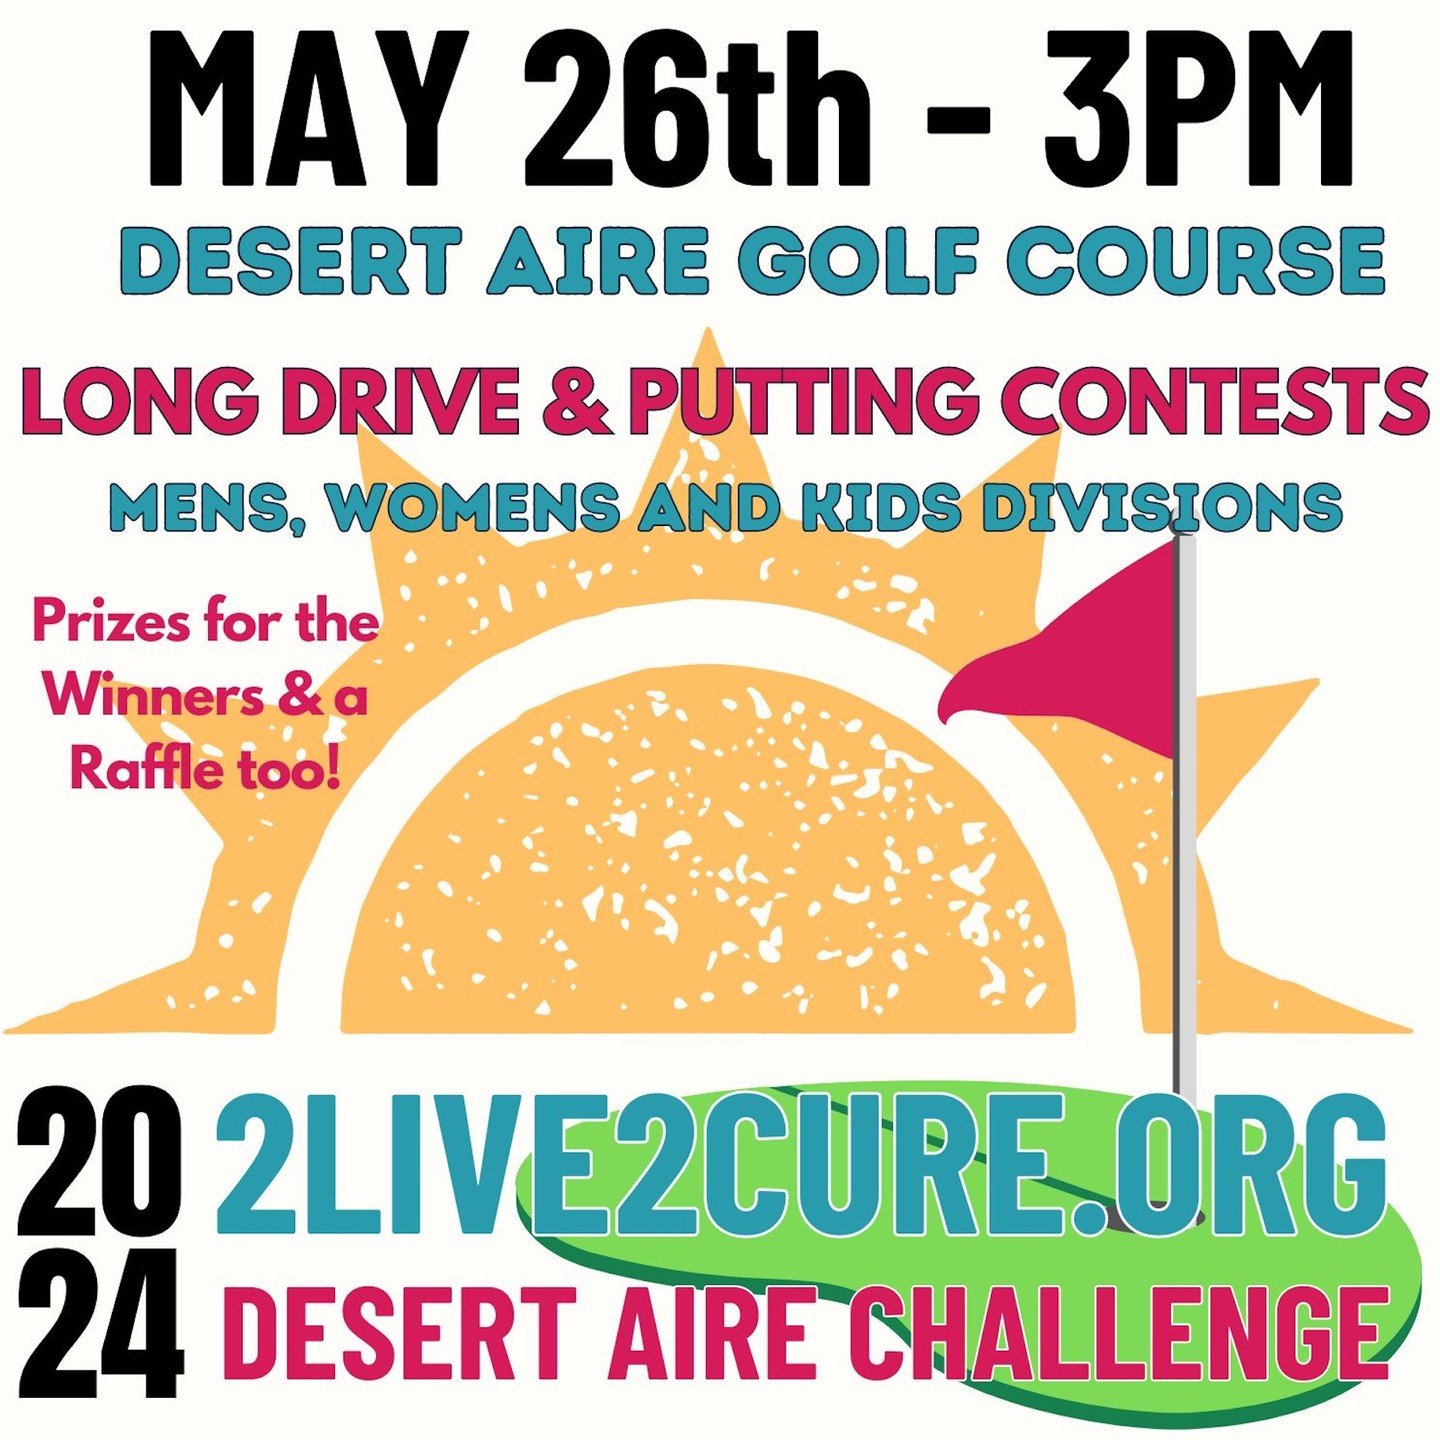 Join us @desertairegolf in Mattawa, WA for our annual Long Drive Challenge. 
Women's, Men's and Kids Divisions. Putting Contests too!
We have got great prizes and a raffle happening to raise funds for the @2Live2Cure free care kit program.